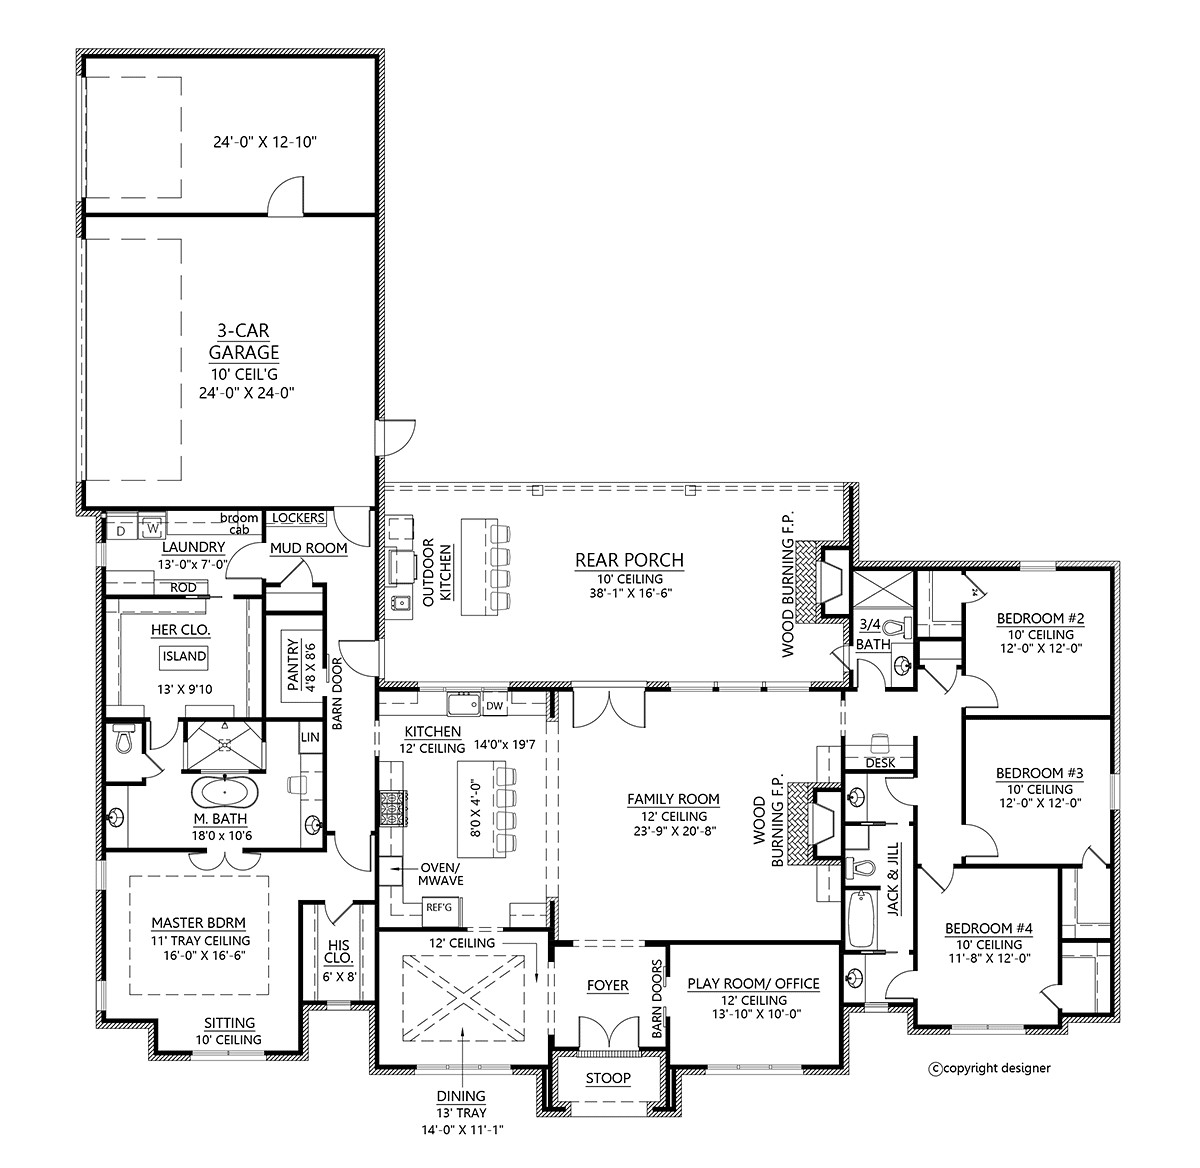 Southern Colonial House Floor Plans Floor Roma